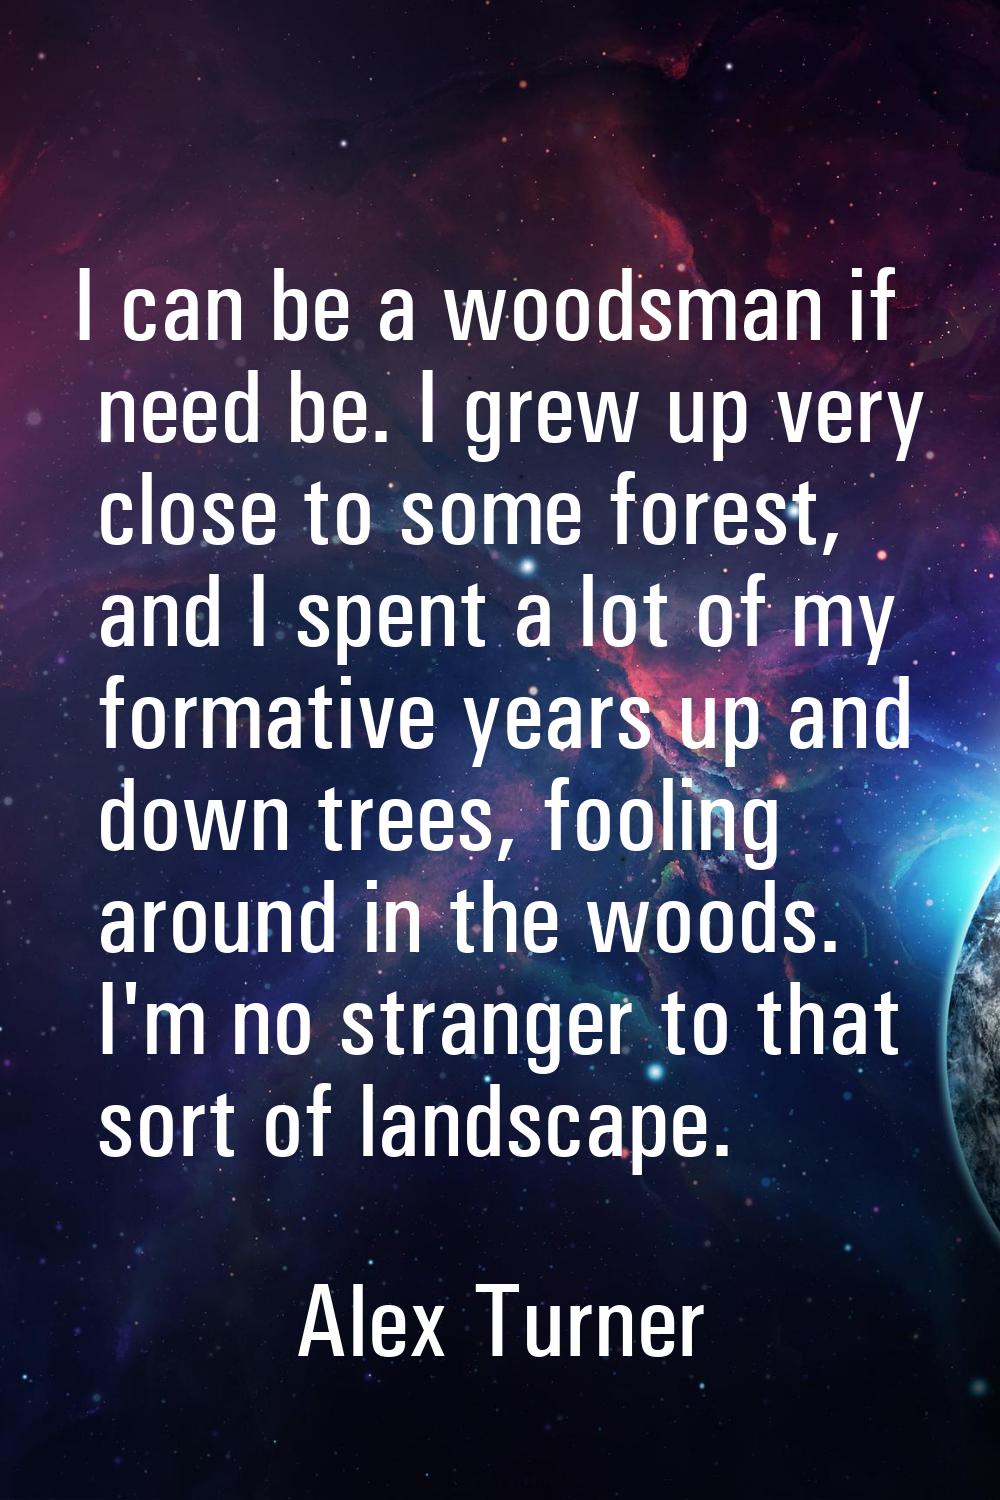 I can be a woodsman if need be. I grew up very close to some forest, and I spent a lot of my format